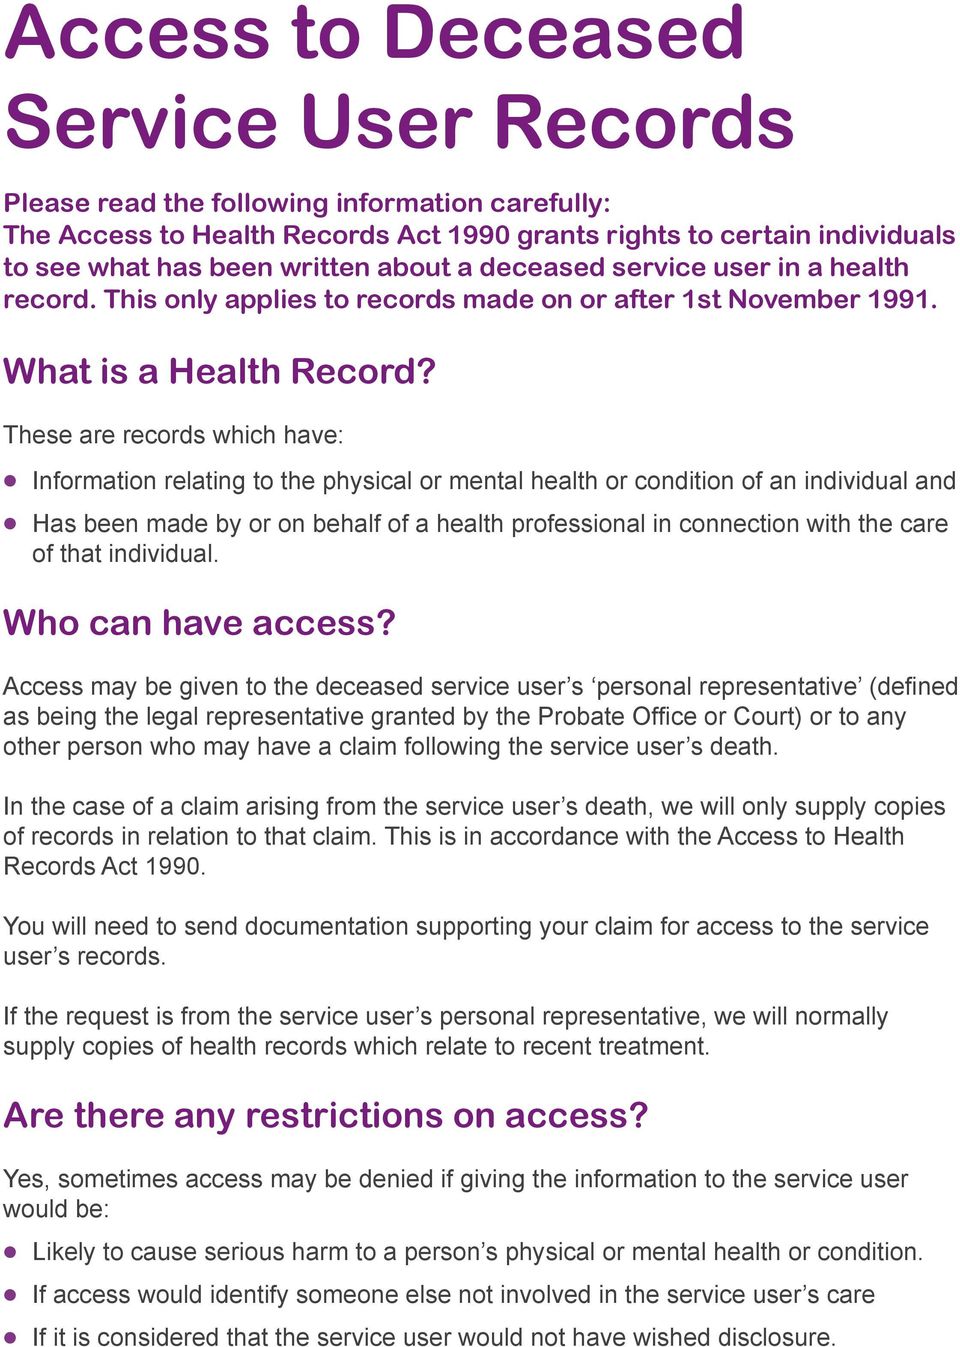 These are records which have: Information relating to the physical or mental health or condition of an individual and Has been made by or on behalf of a health professional in connection with the